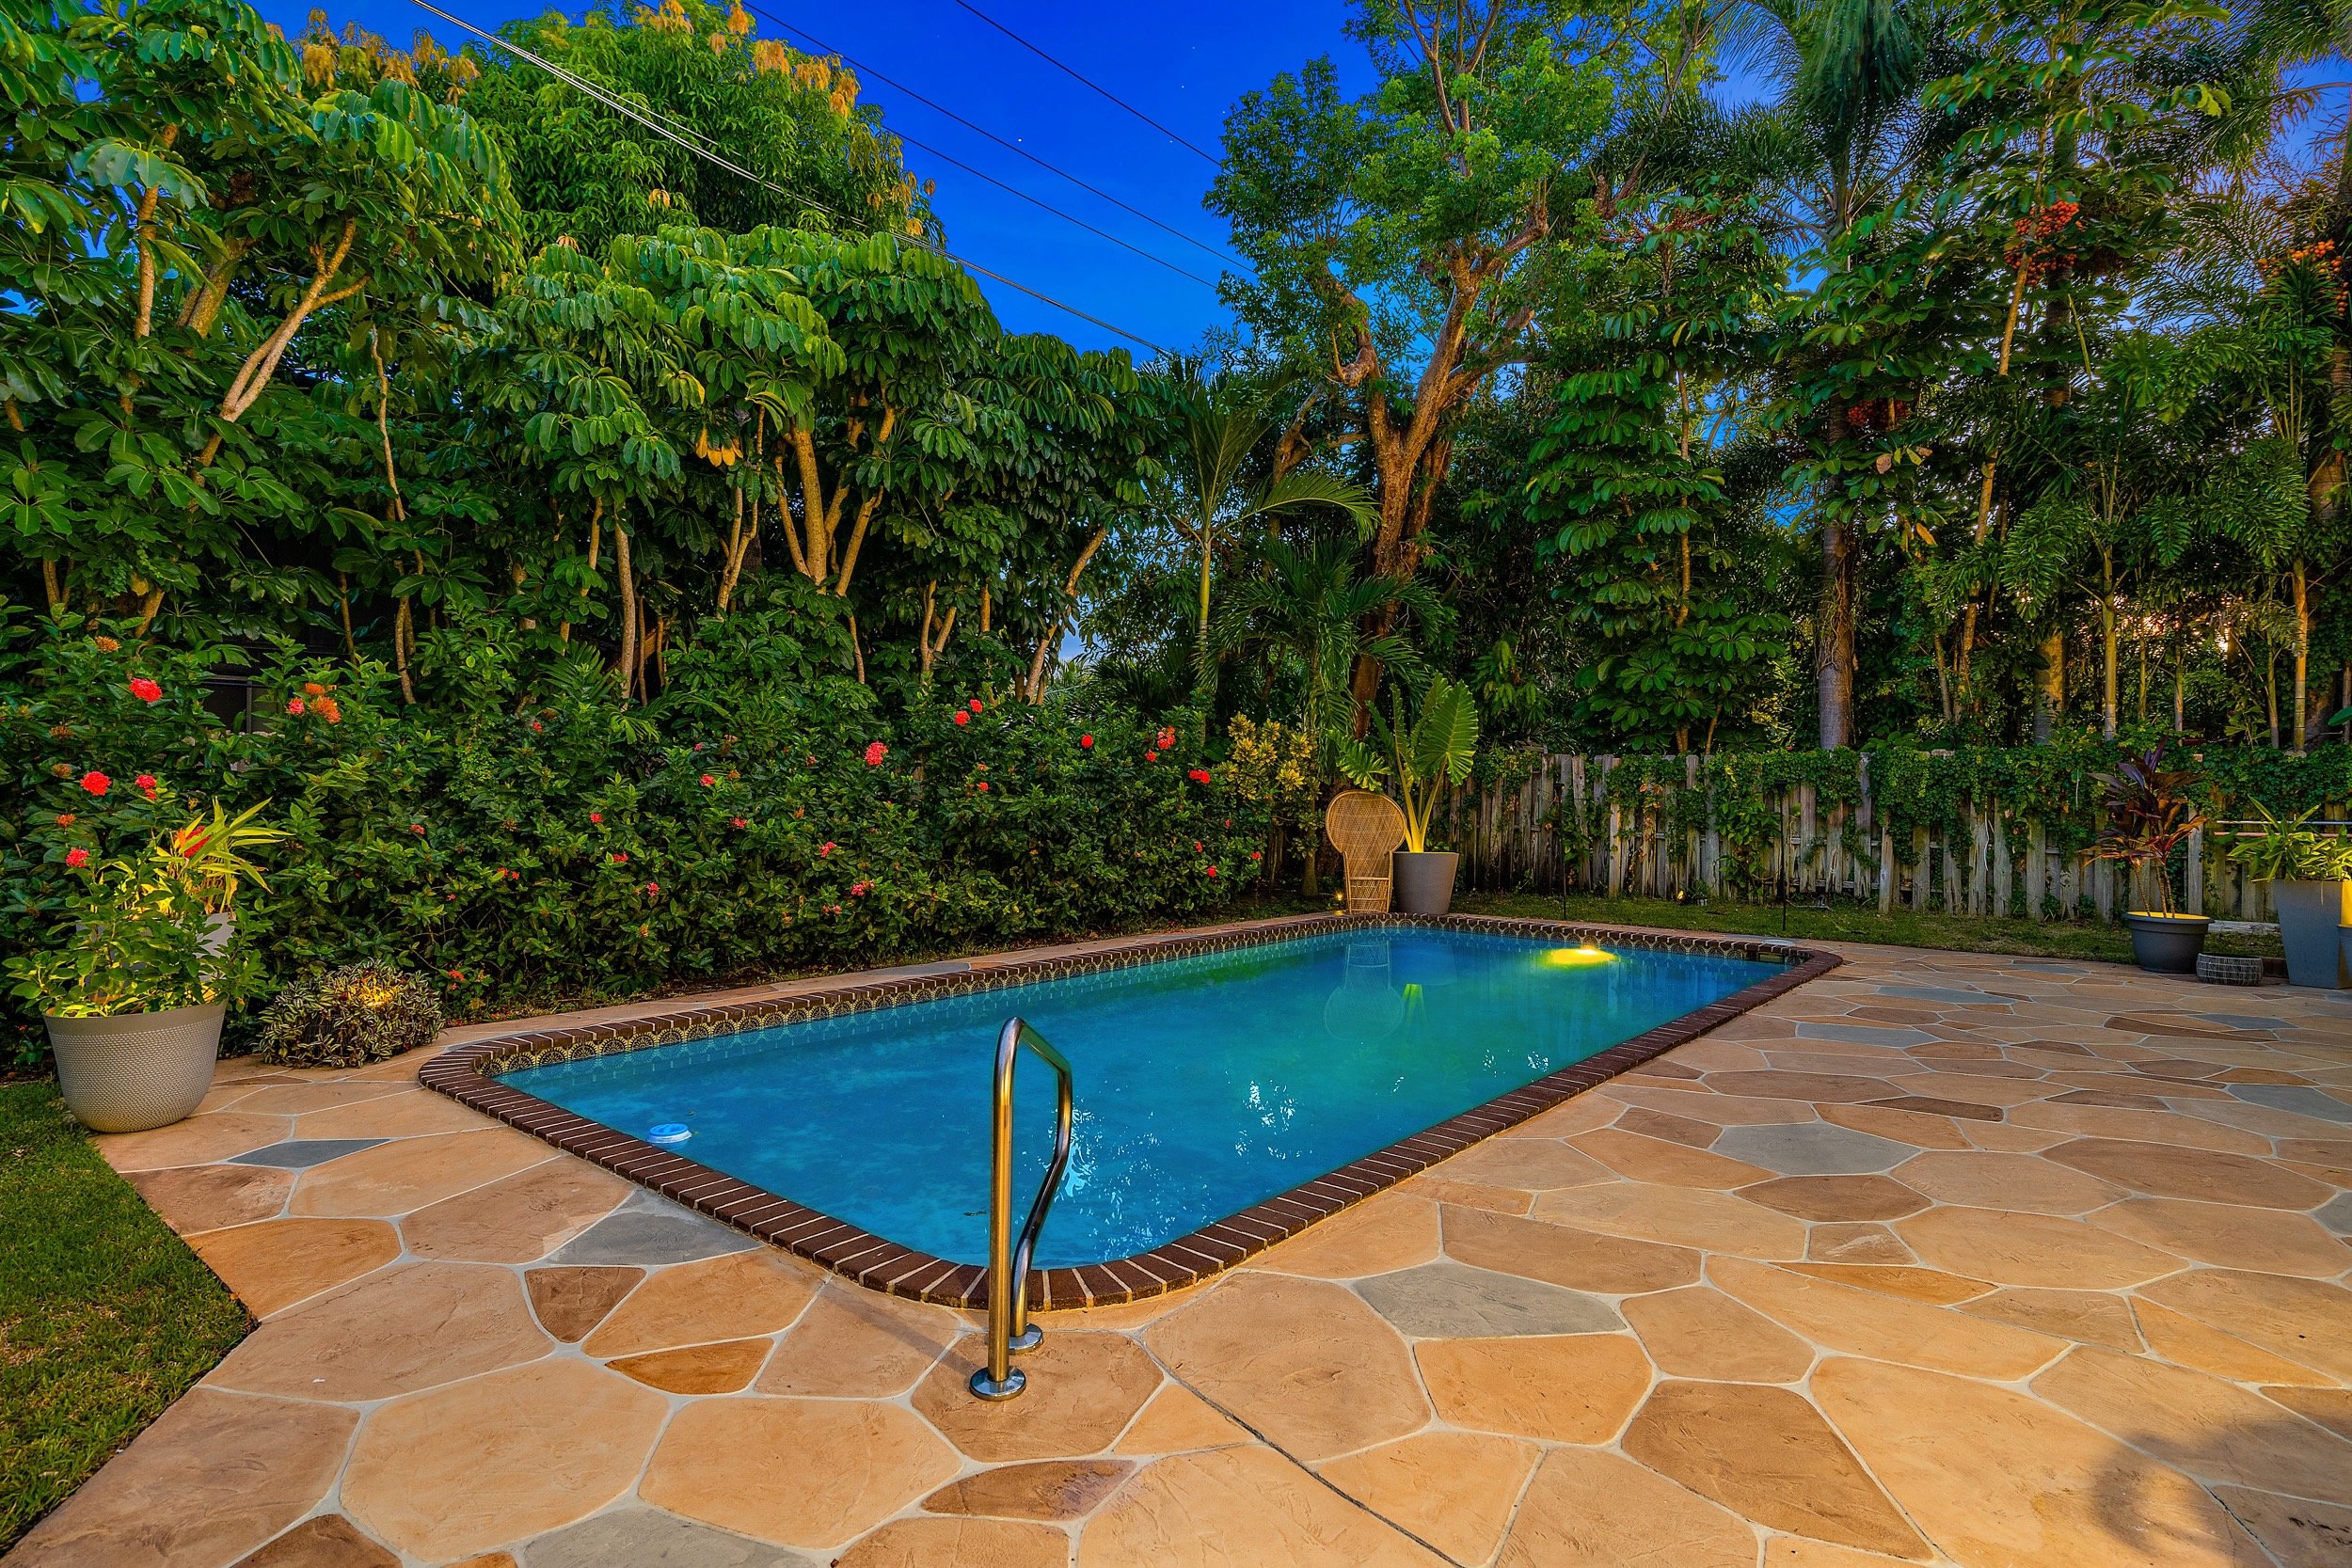  stunning and expansive home for sale in boca raton florida by the mneyer lucas team. the best real estate team in palm beach county lists this 5 bedroom 3.5 bathroom home with three large living areas, two dining room option, large sparkling blue po